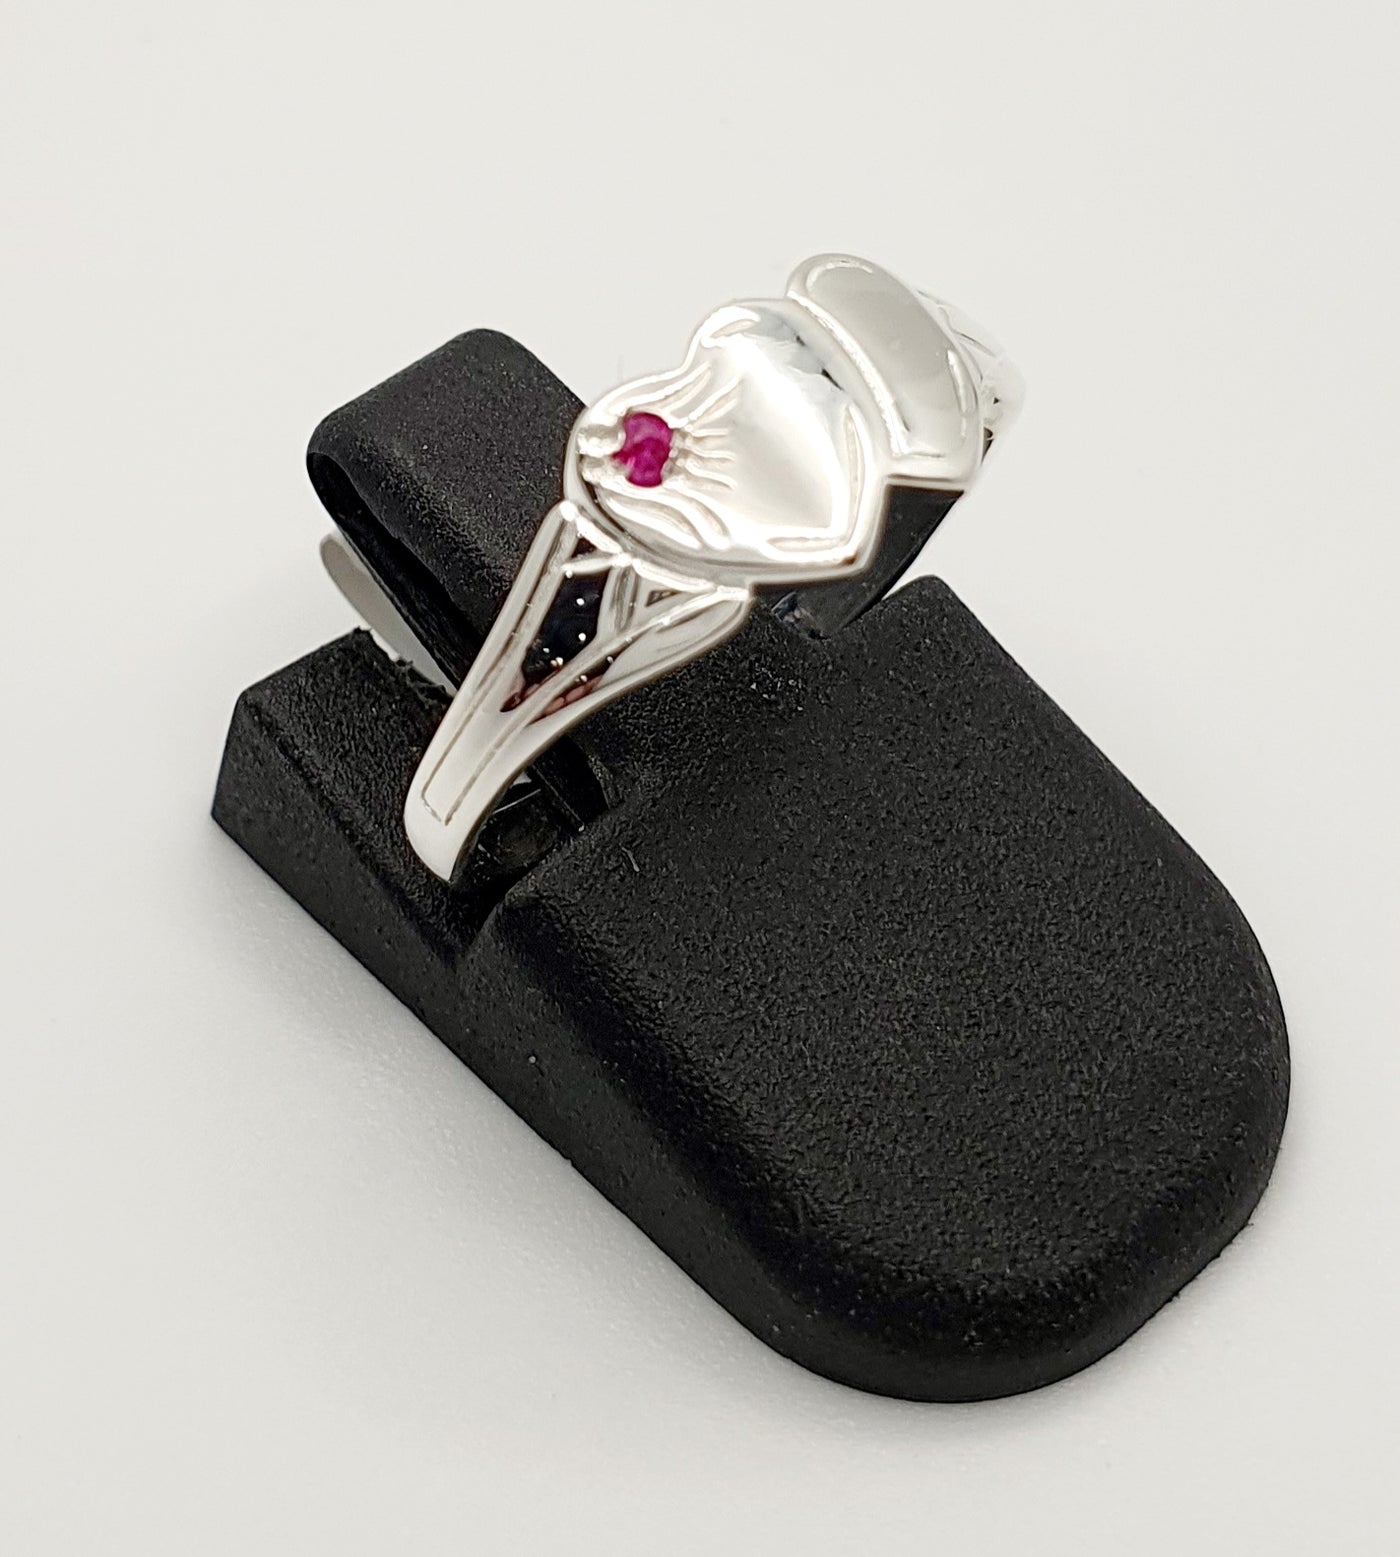 S/S Double Heart Signet Ring With Red Stone. Size K